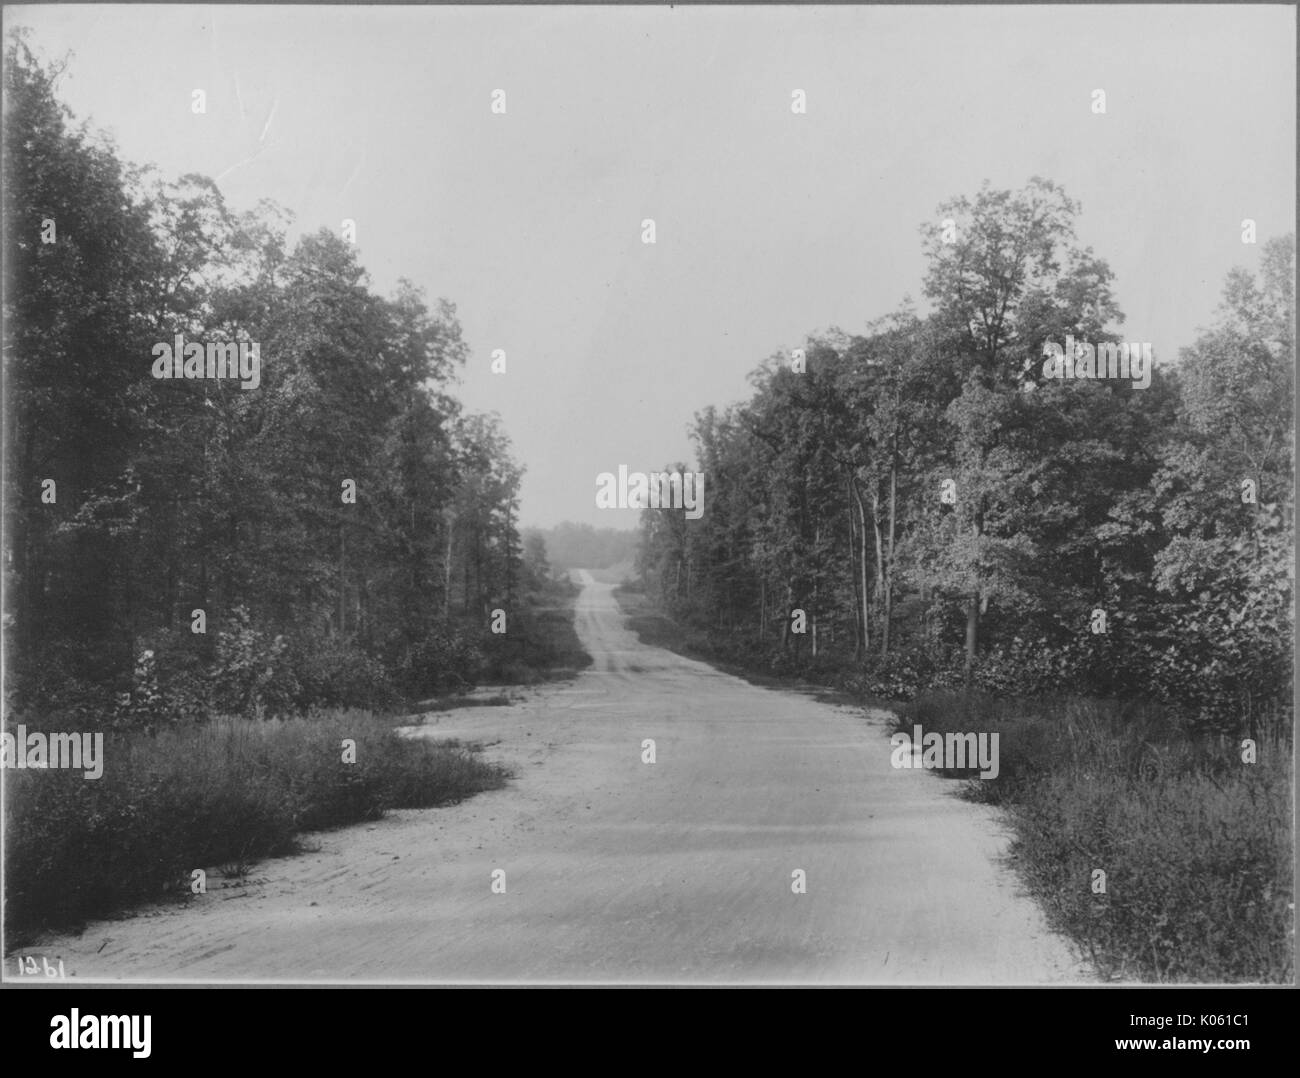 Long dirt road near Roland Park and Guilford, the road is bordered by weeds and untrimmed grass in the foreground and bordered by tall trees in the background, United States, 1910. This image is from a series documenting the construction and sale of homes in the Roland Park/Guilford neighborhood of Baltimore, a streetcar suburb and one of the first planned communities in the United States. Stock Photo